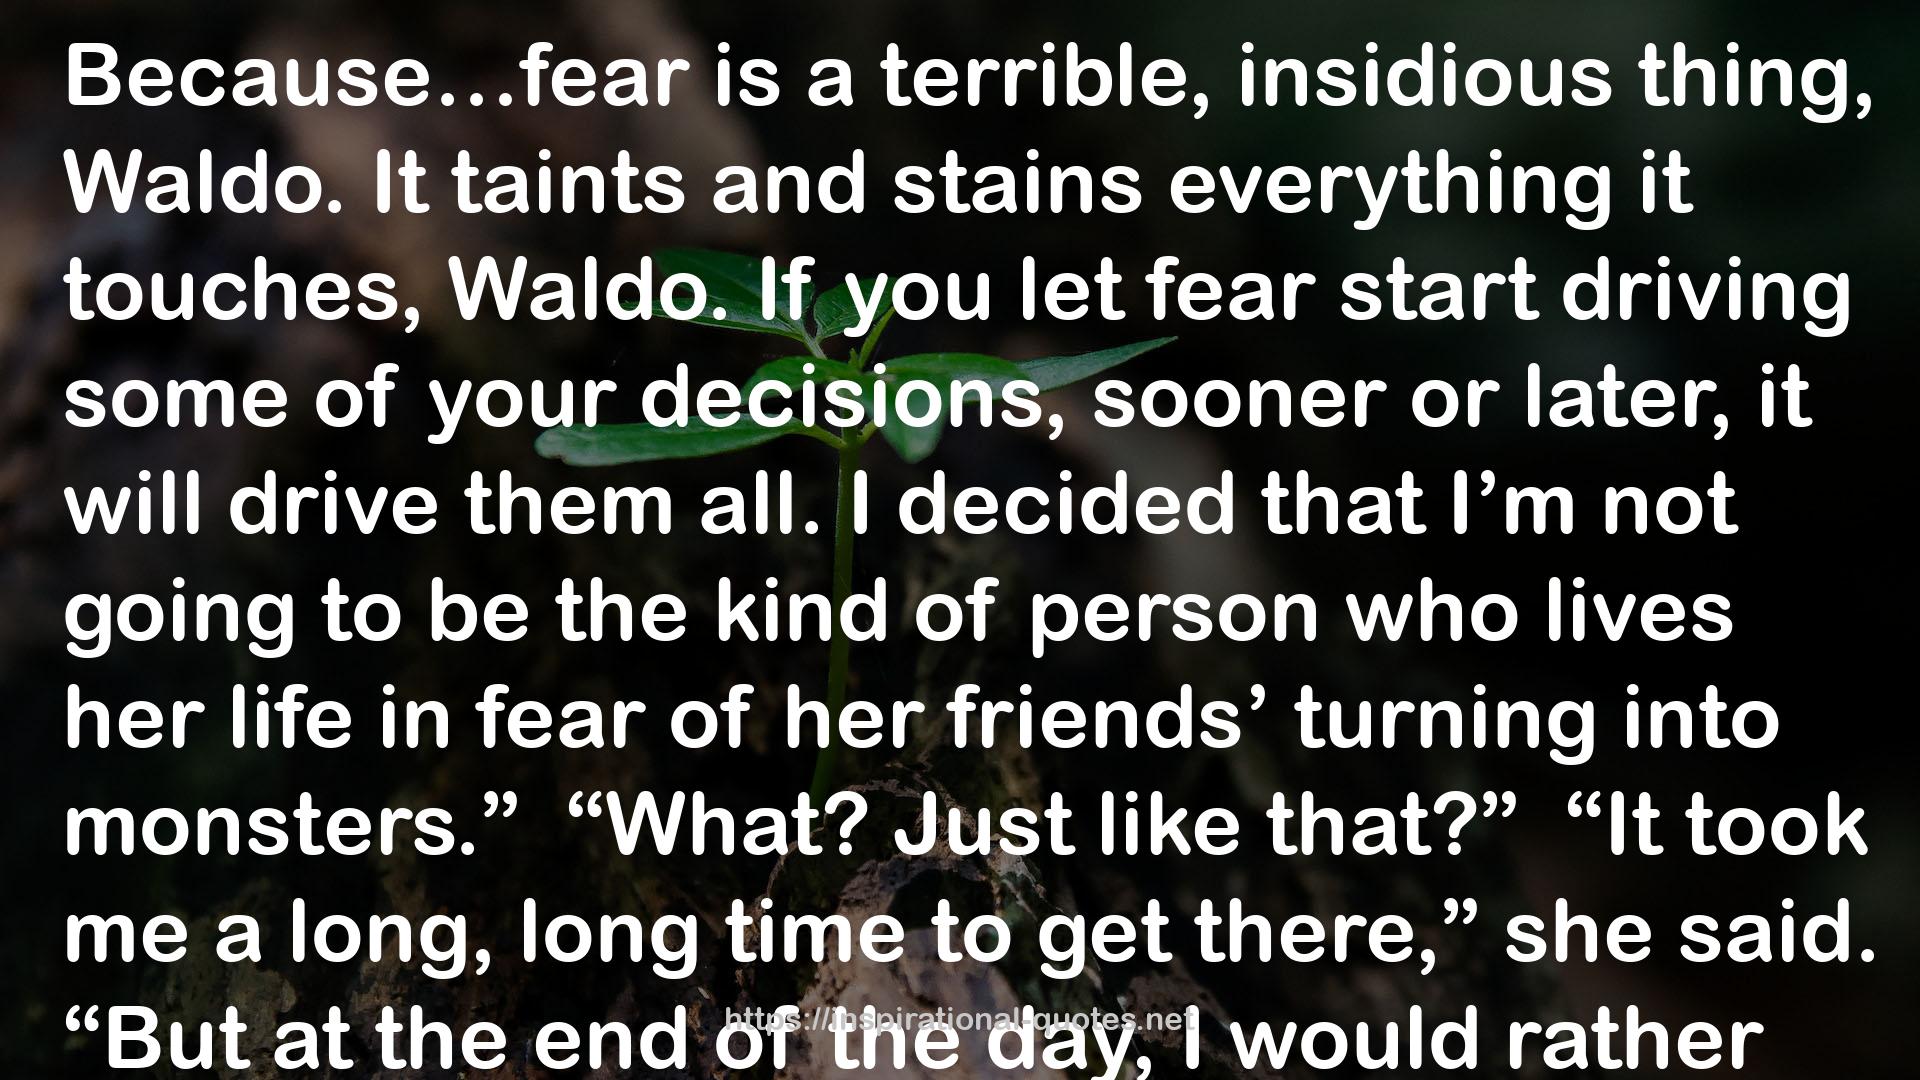 Skin Game (The Dresden Files, #15) QUOTES